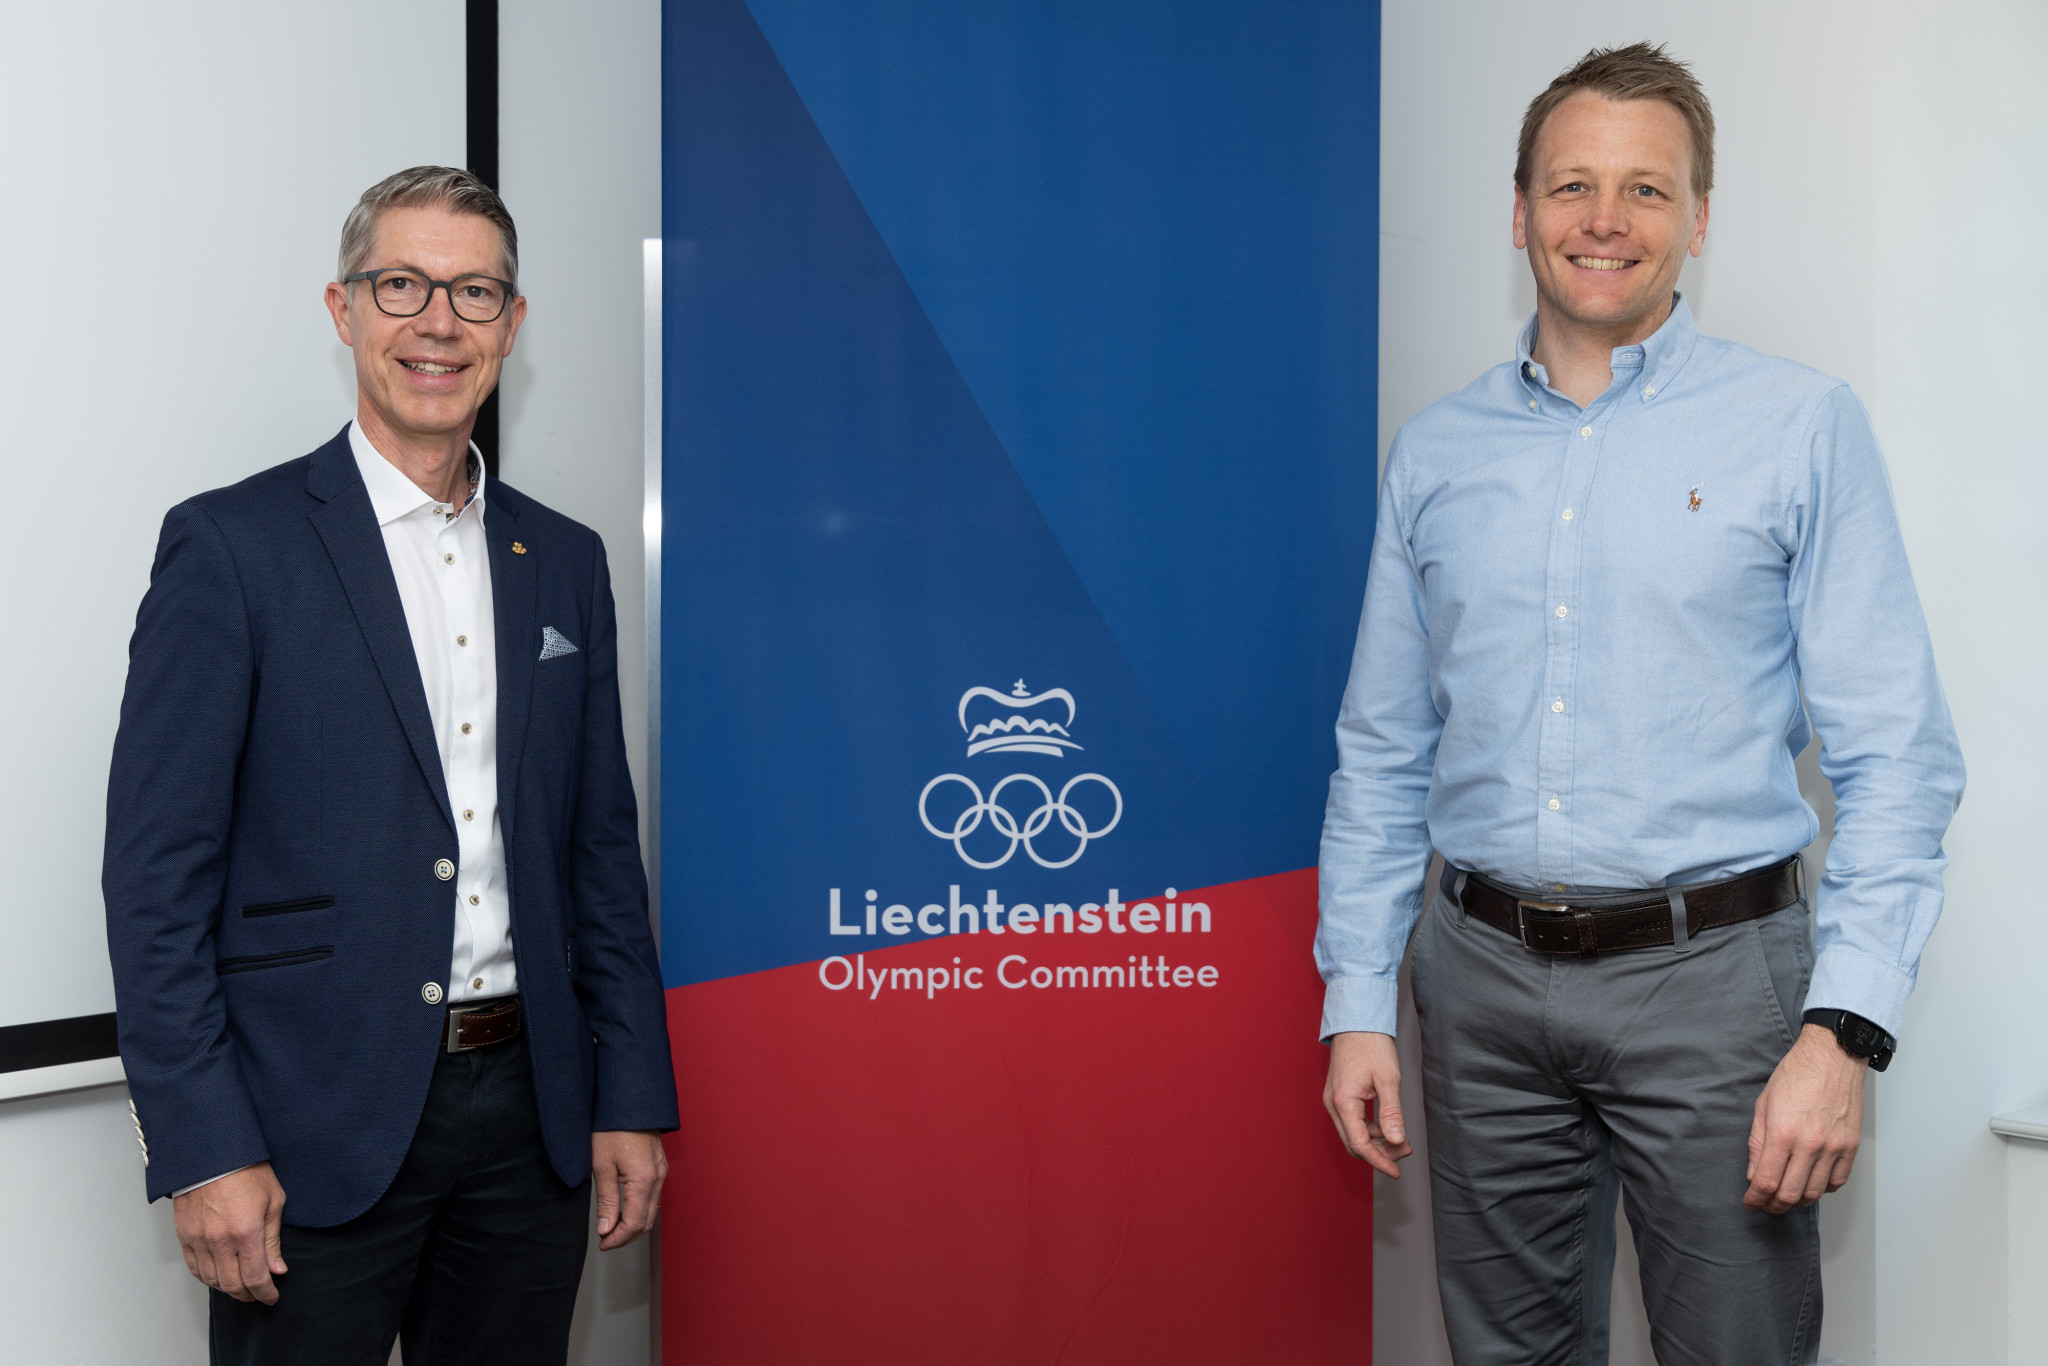 Liechtenstein Olympic Committee focuses on being healthy, successful and sustainable as it launches new vision